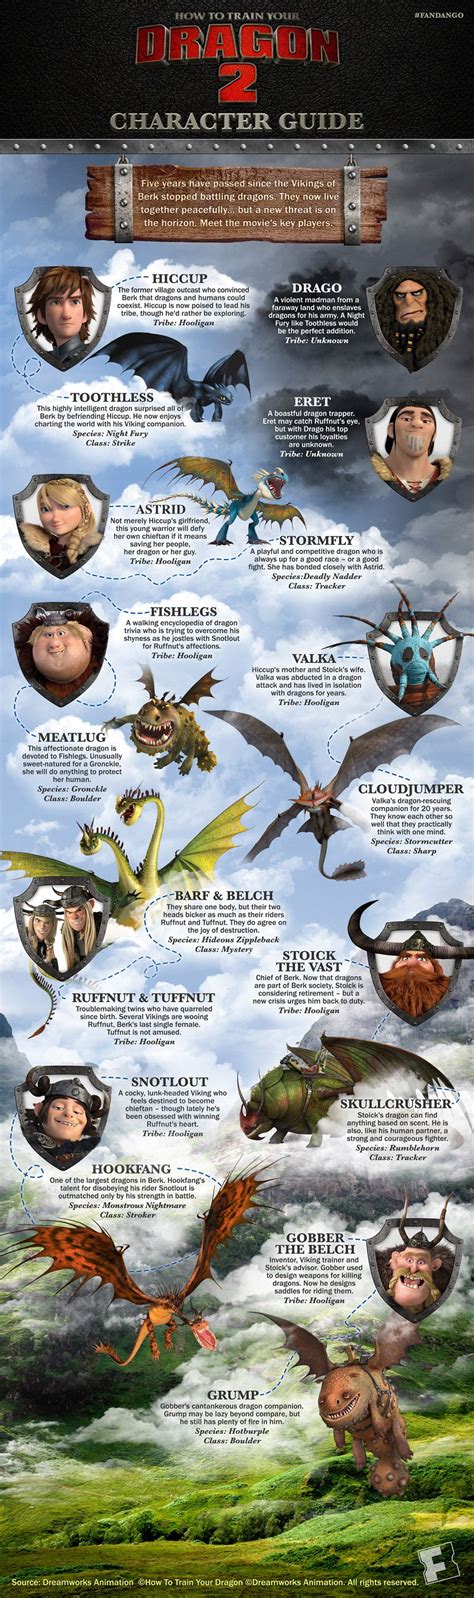 Character List Httyd 2 Httyd Dragons Dreamworks Dragons Disney And